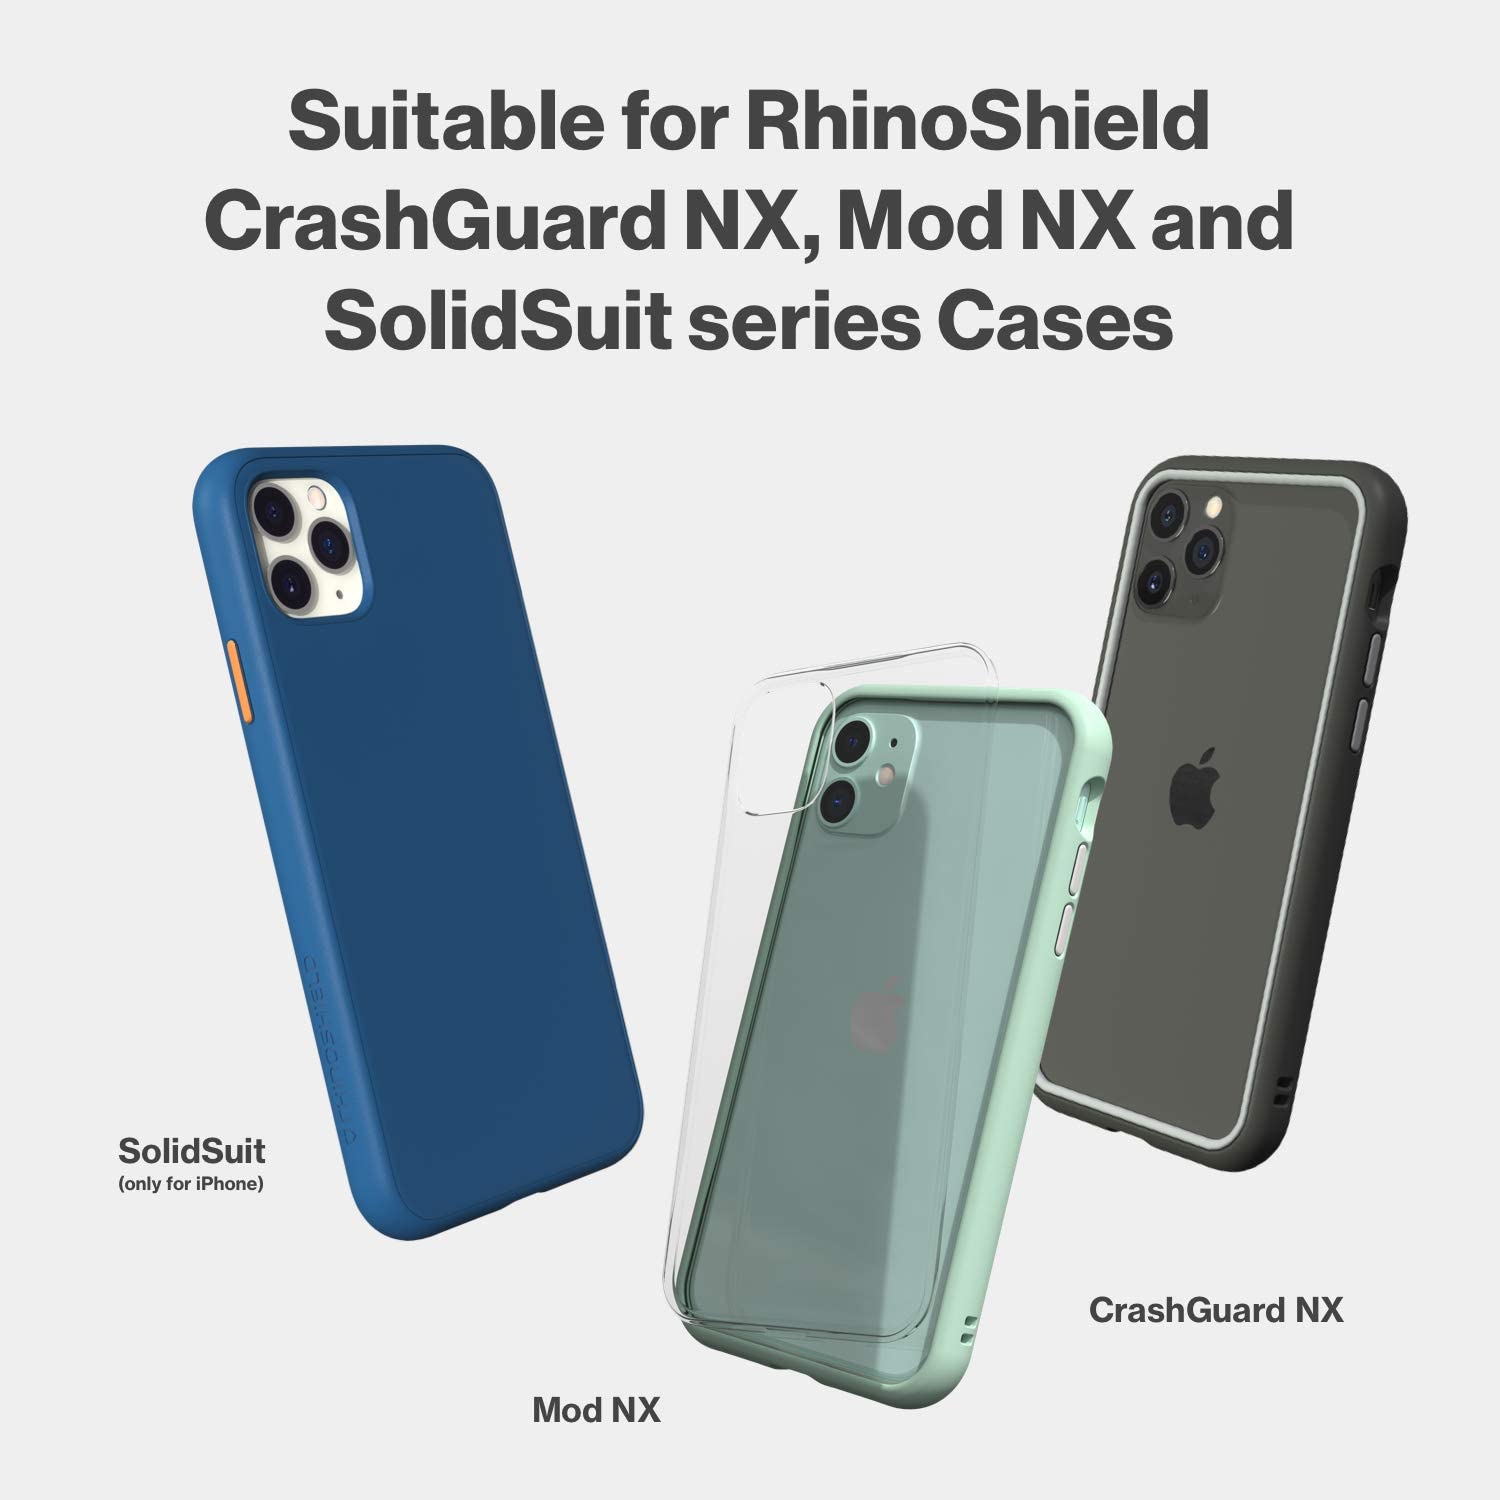 RhinoShield Extra Buttons For iPhones CrashGuard NX / Mod NX / Solid Suit iPhone 12 / 11 / XS / XR / 8 / 7 / 6 Series